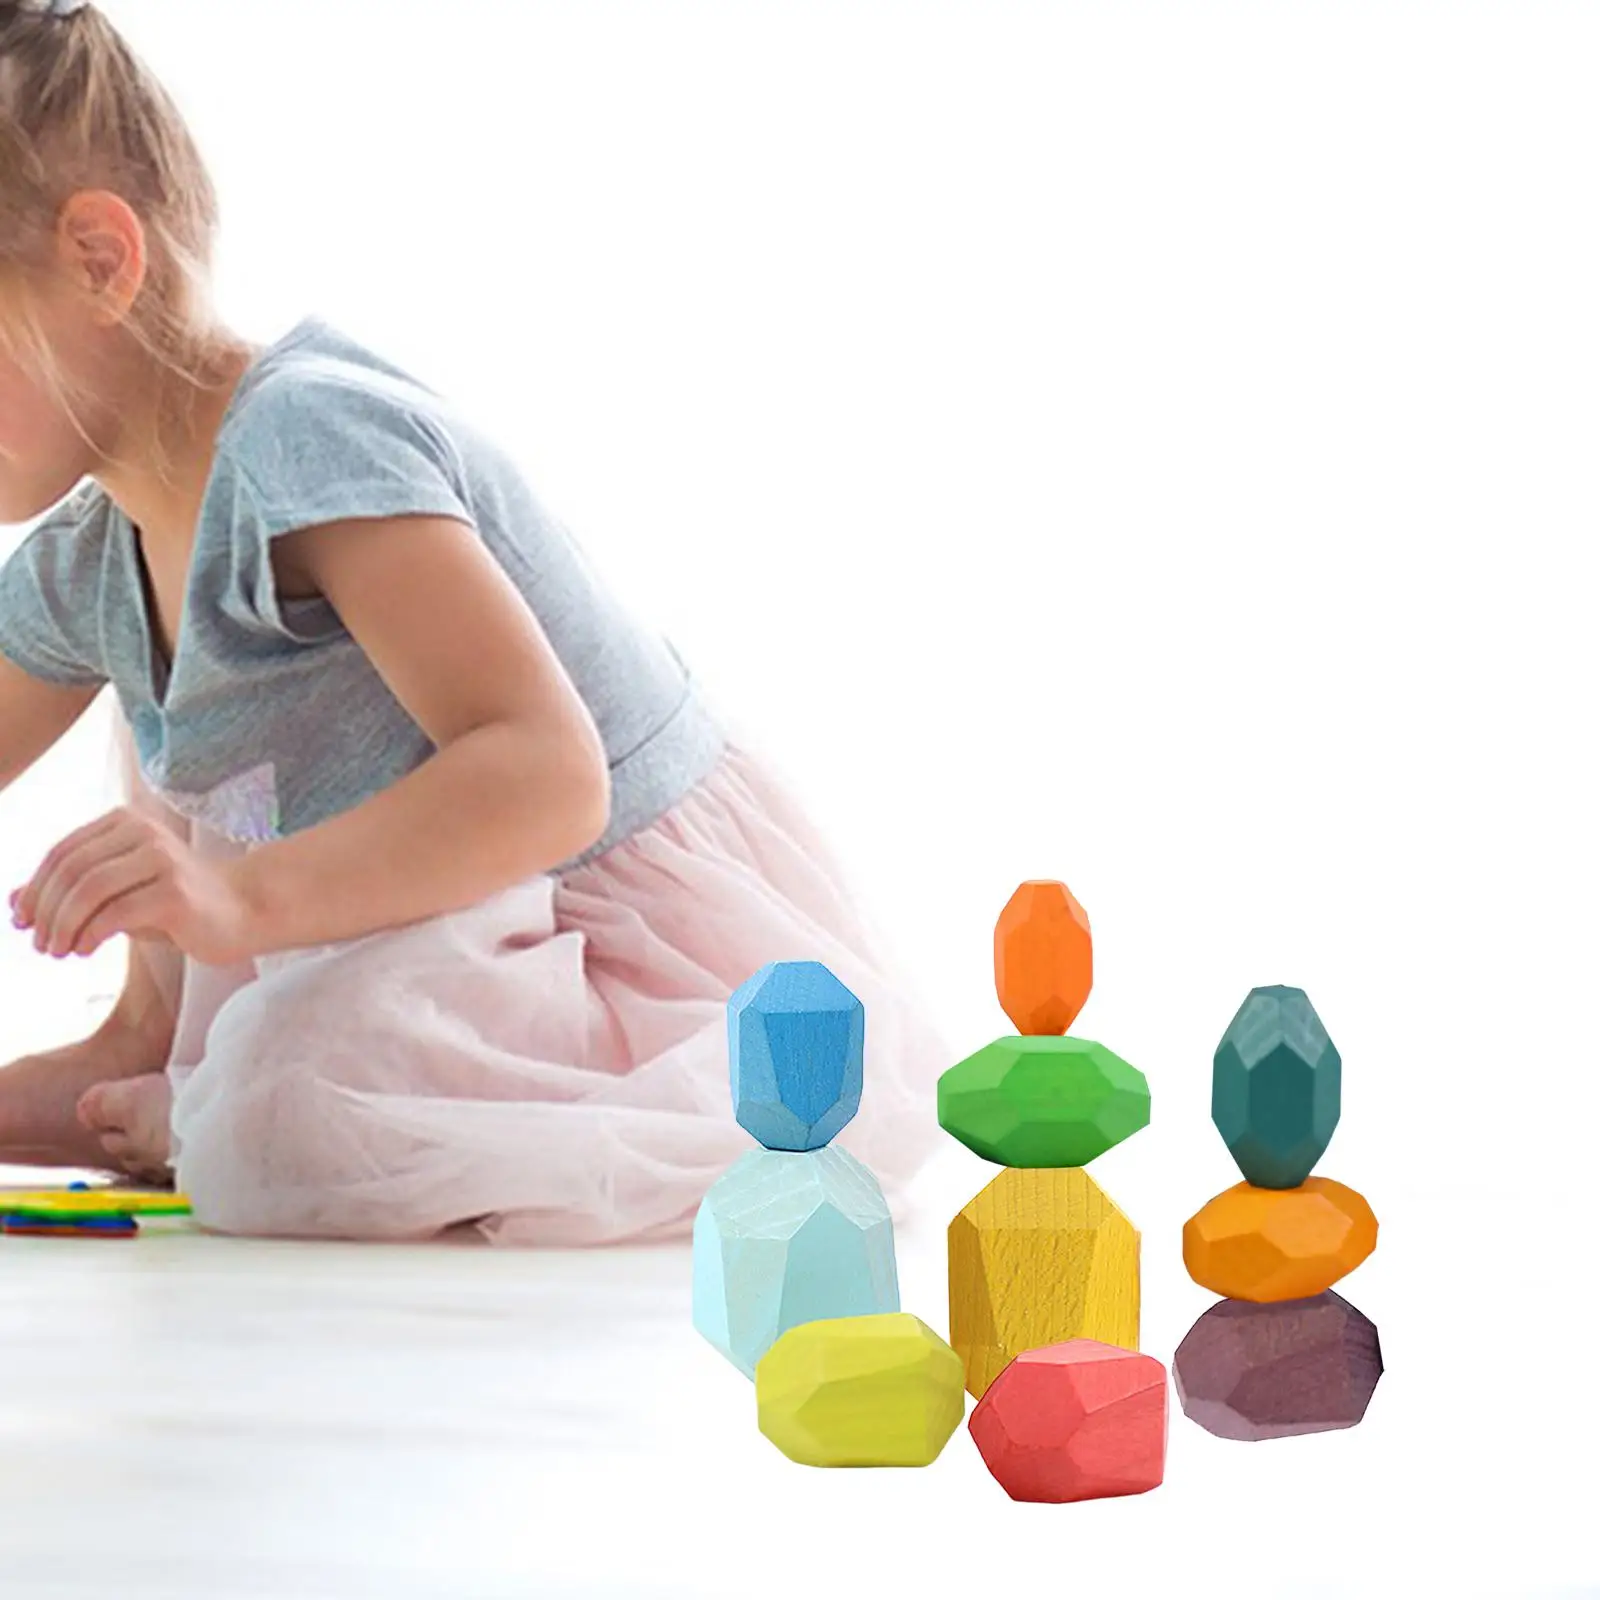 Wooden Balancing Stacking Stones Montessori Colorful Creative for Boys Girls 3 Years up